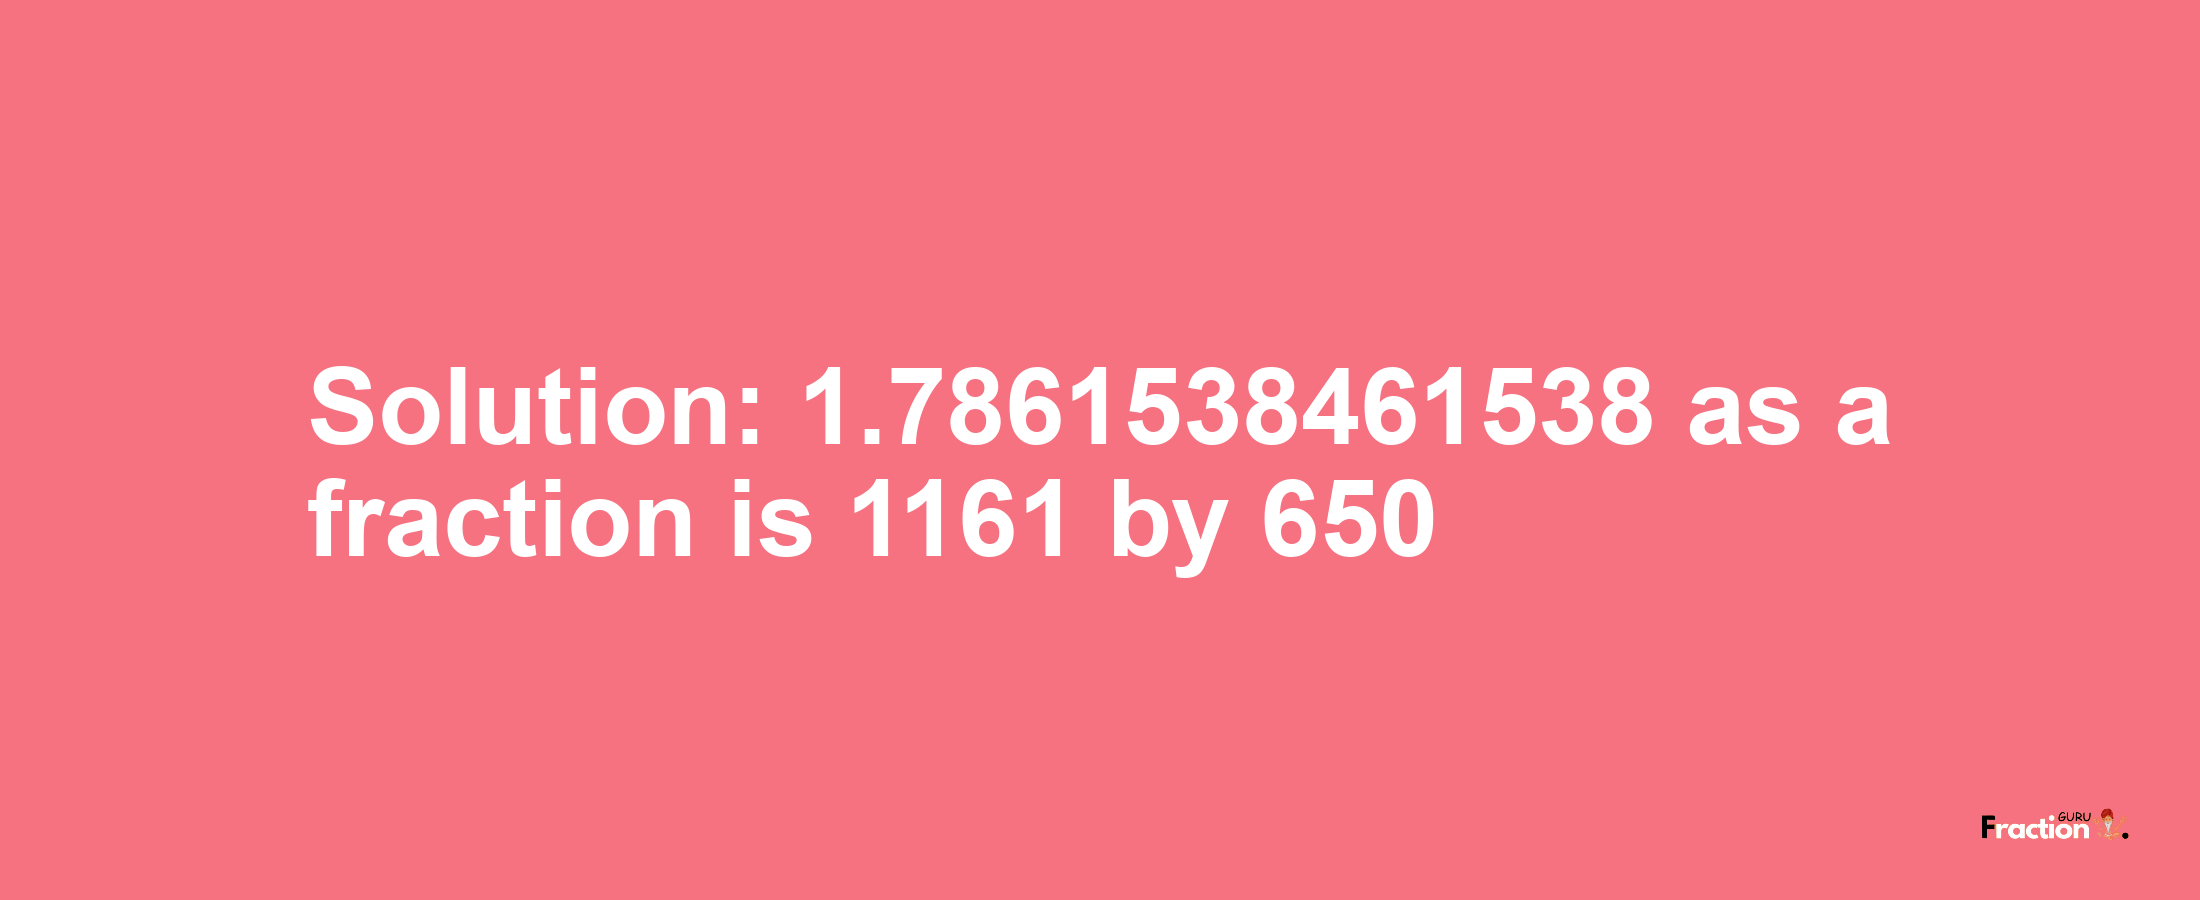 Solution:1.7861538461538 as a fraction is 1161/650